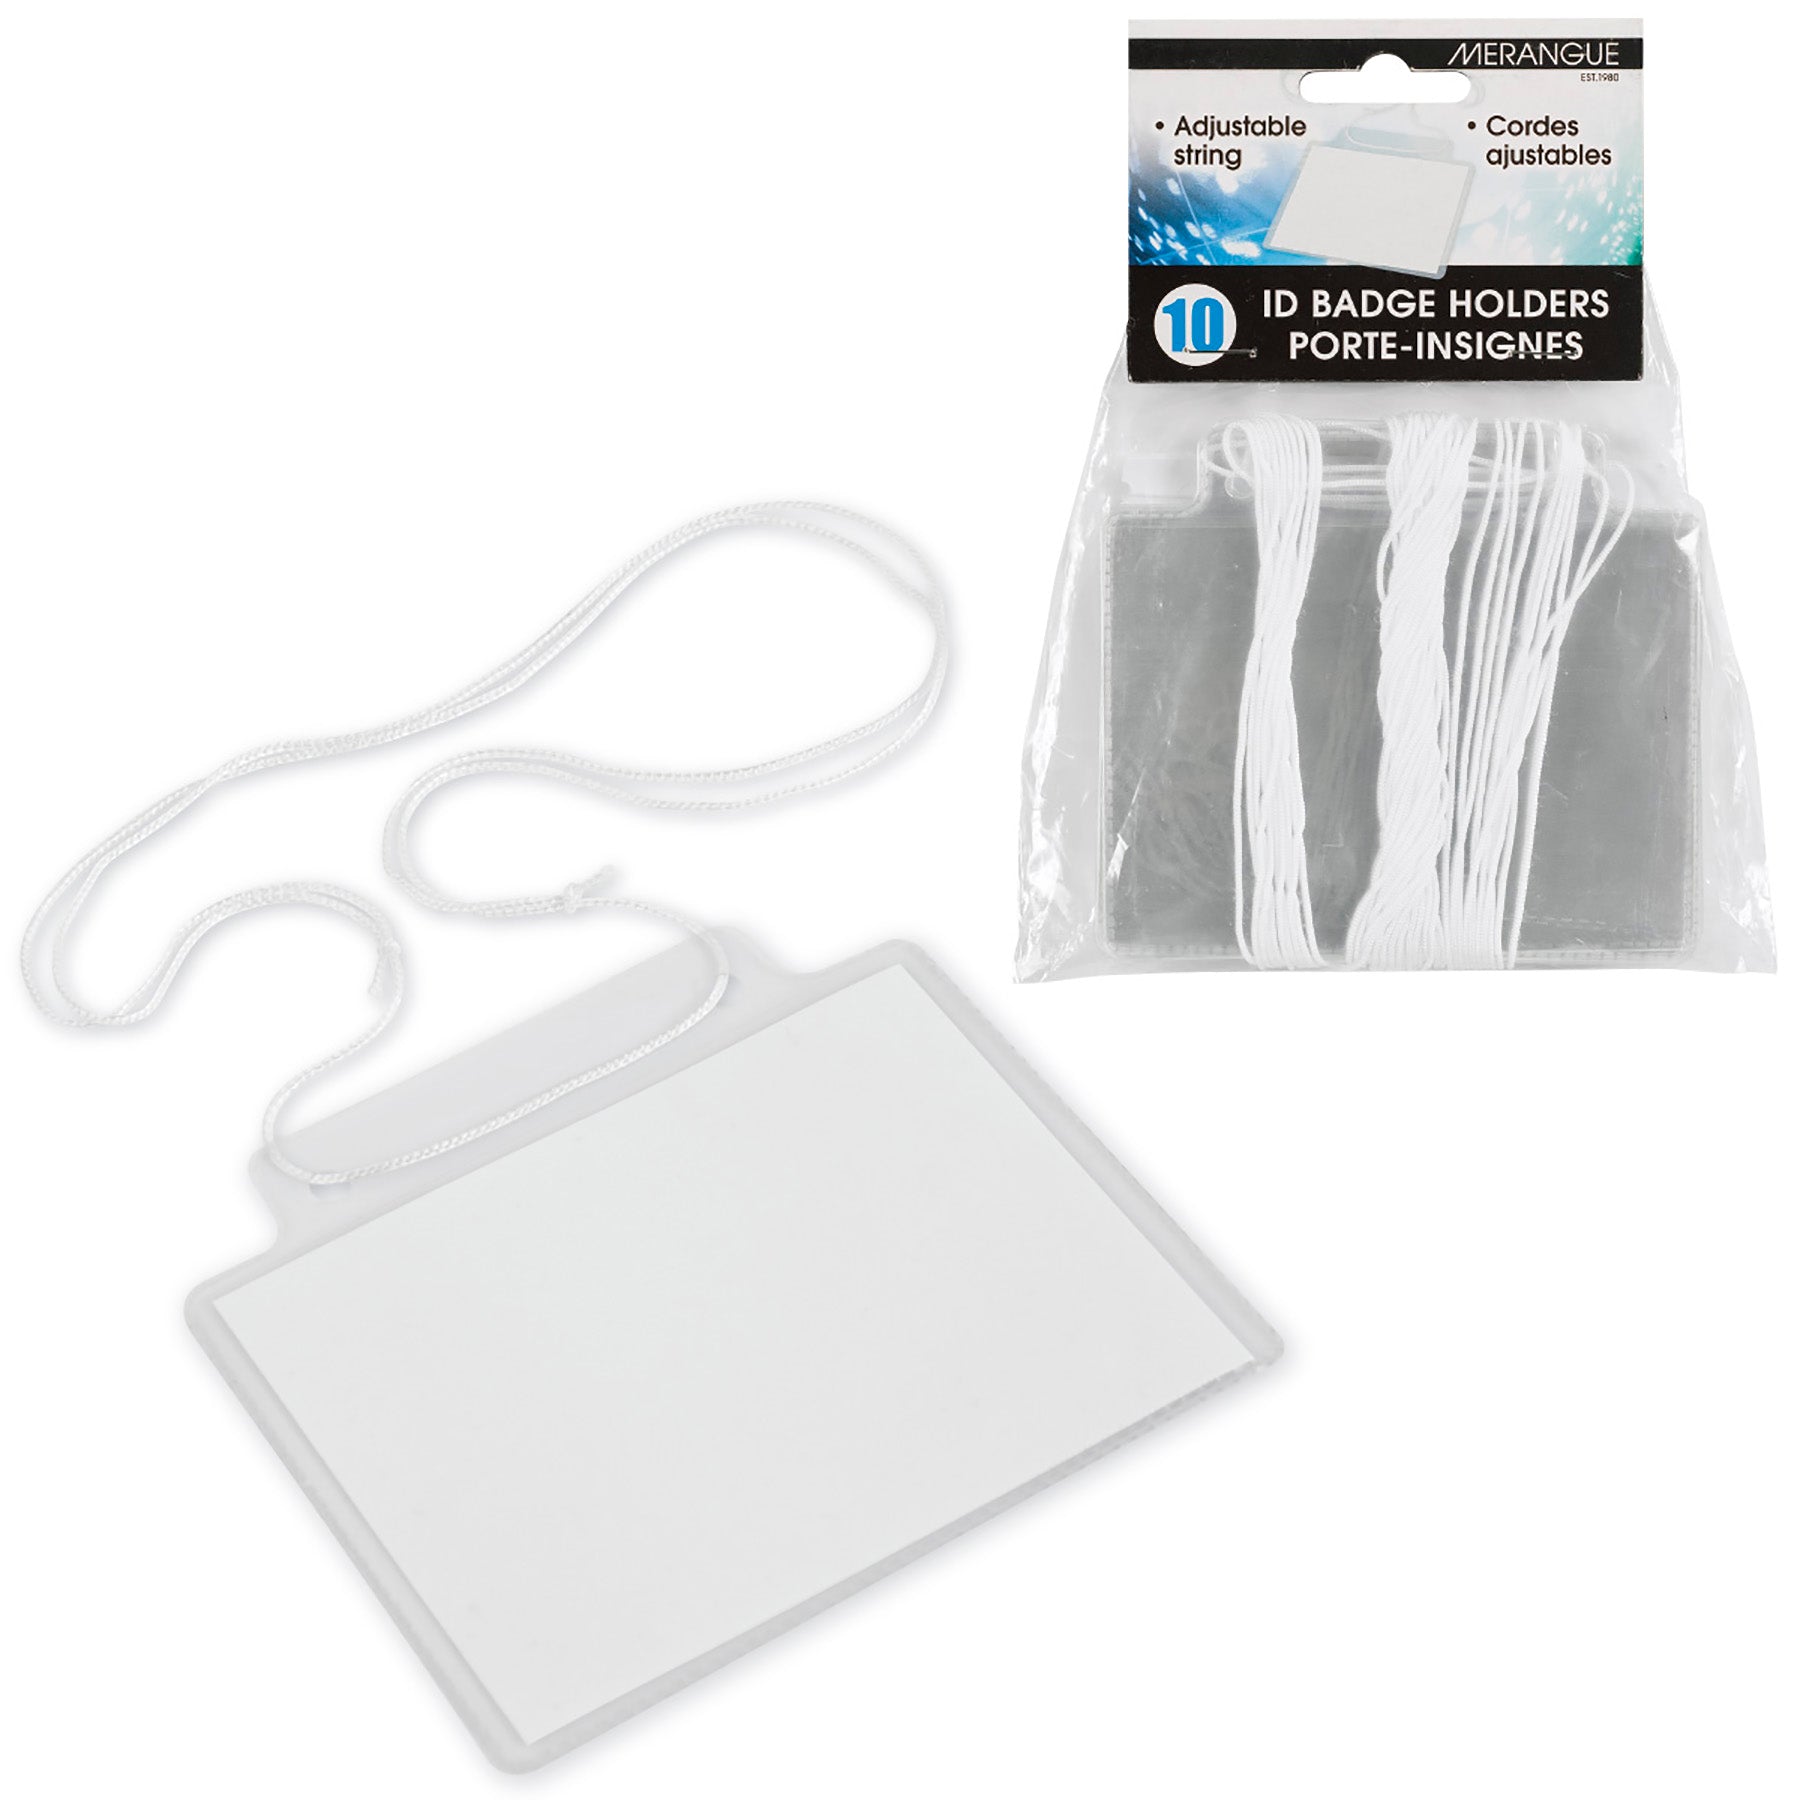 Merangue 10 ID Badge Holders Ajustable String Fits 4x3in Card Included